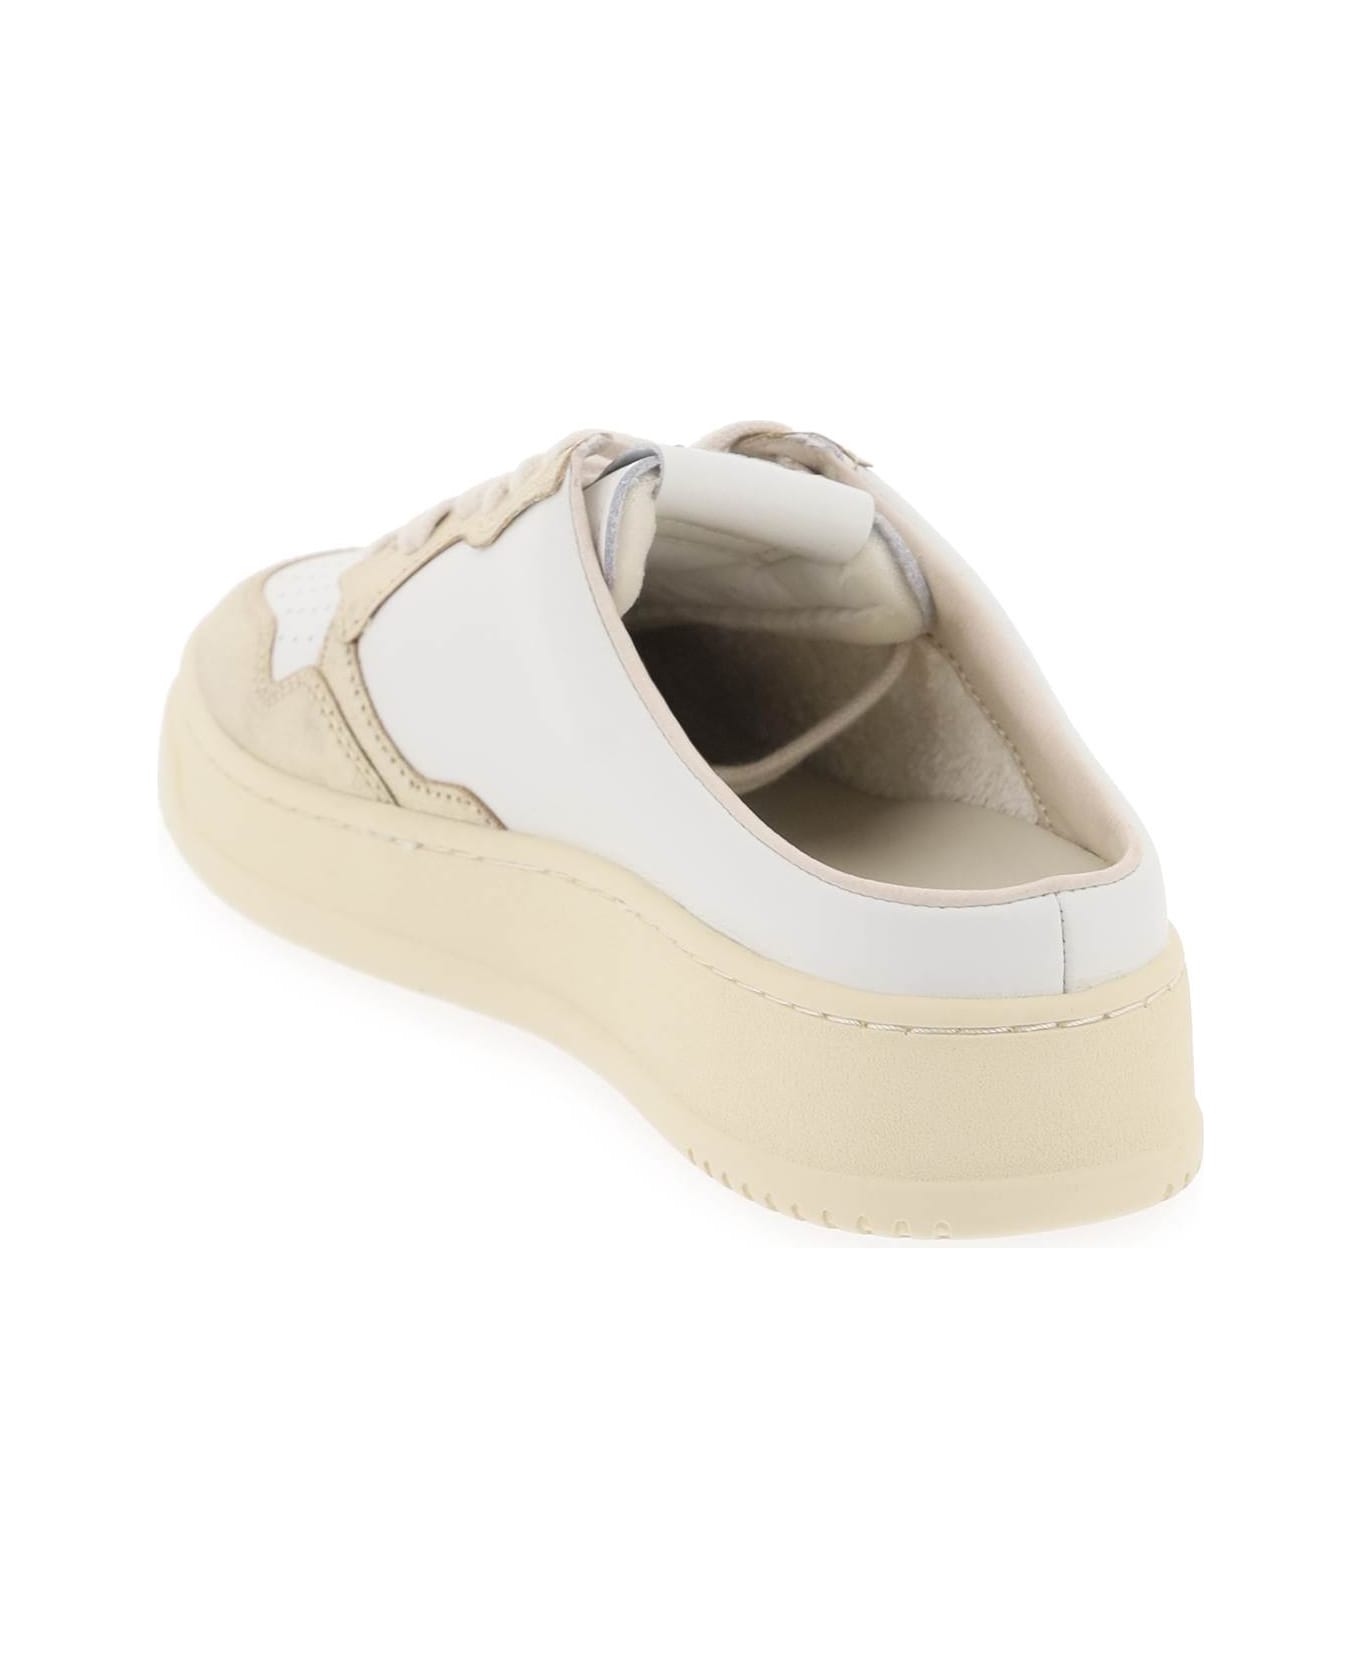 Autry Medalist Mule Low Sneakers - WHITE PLATINUM (White)